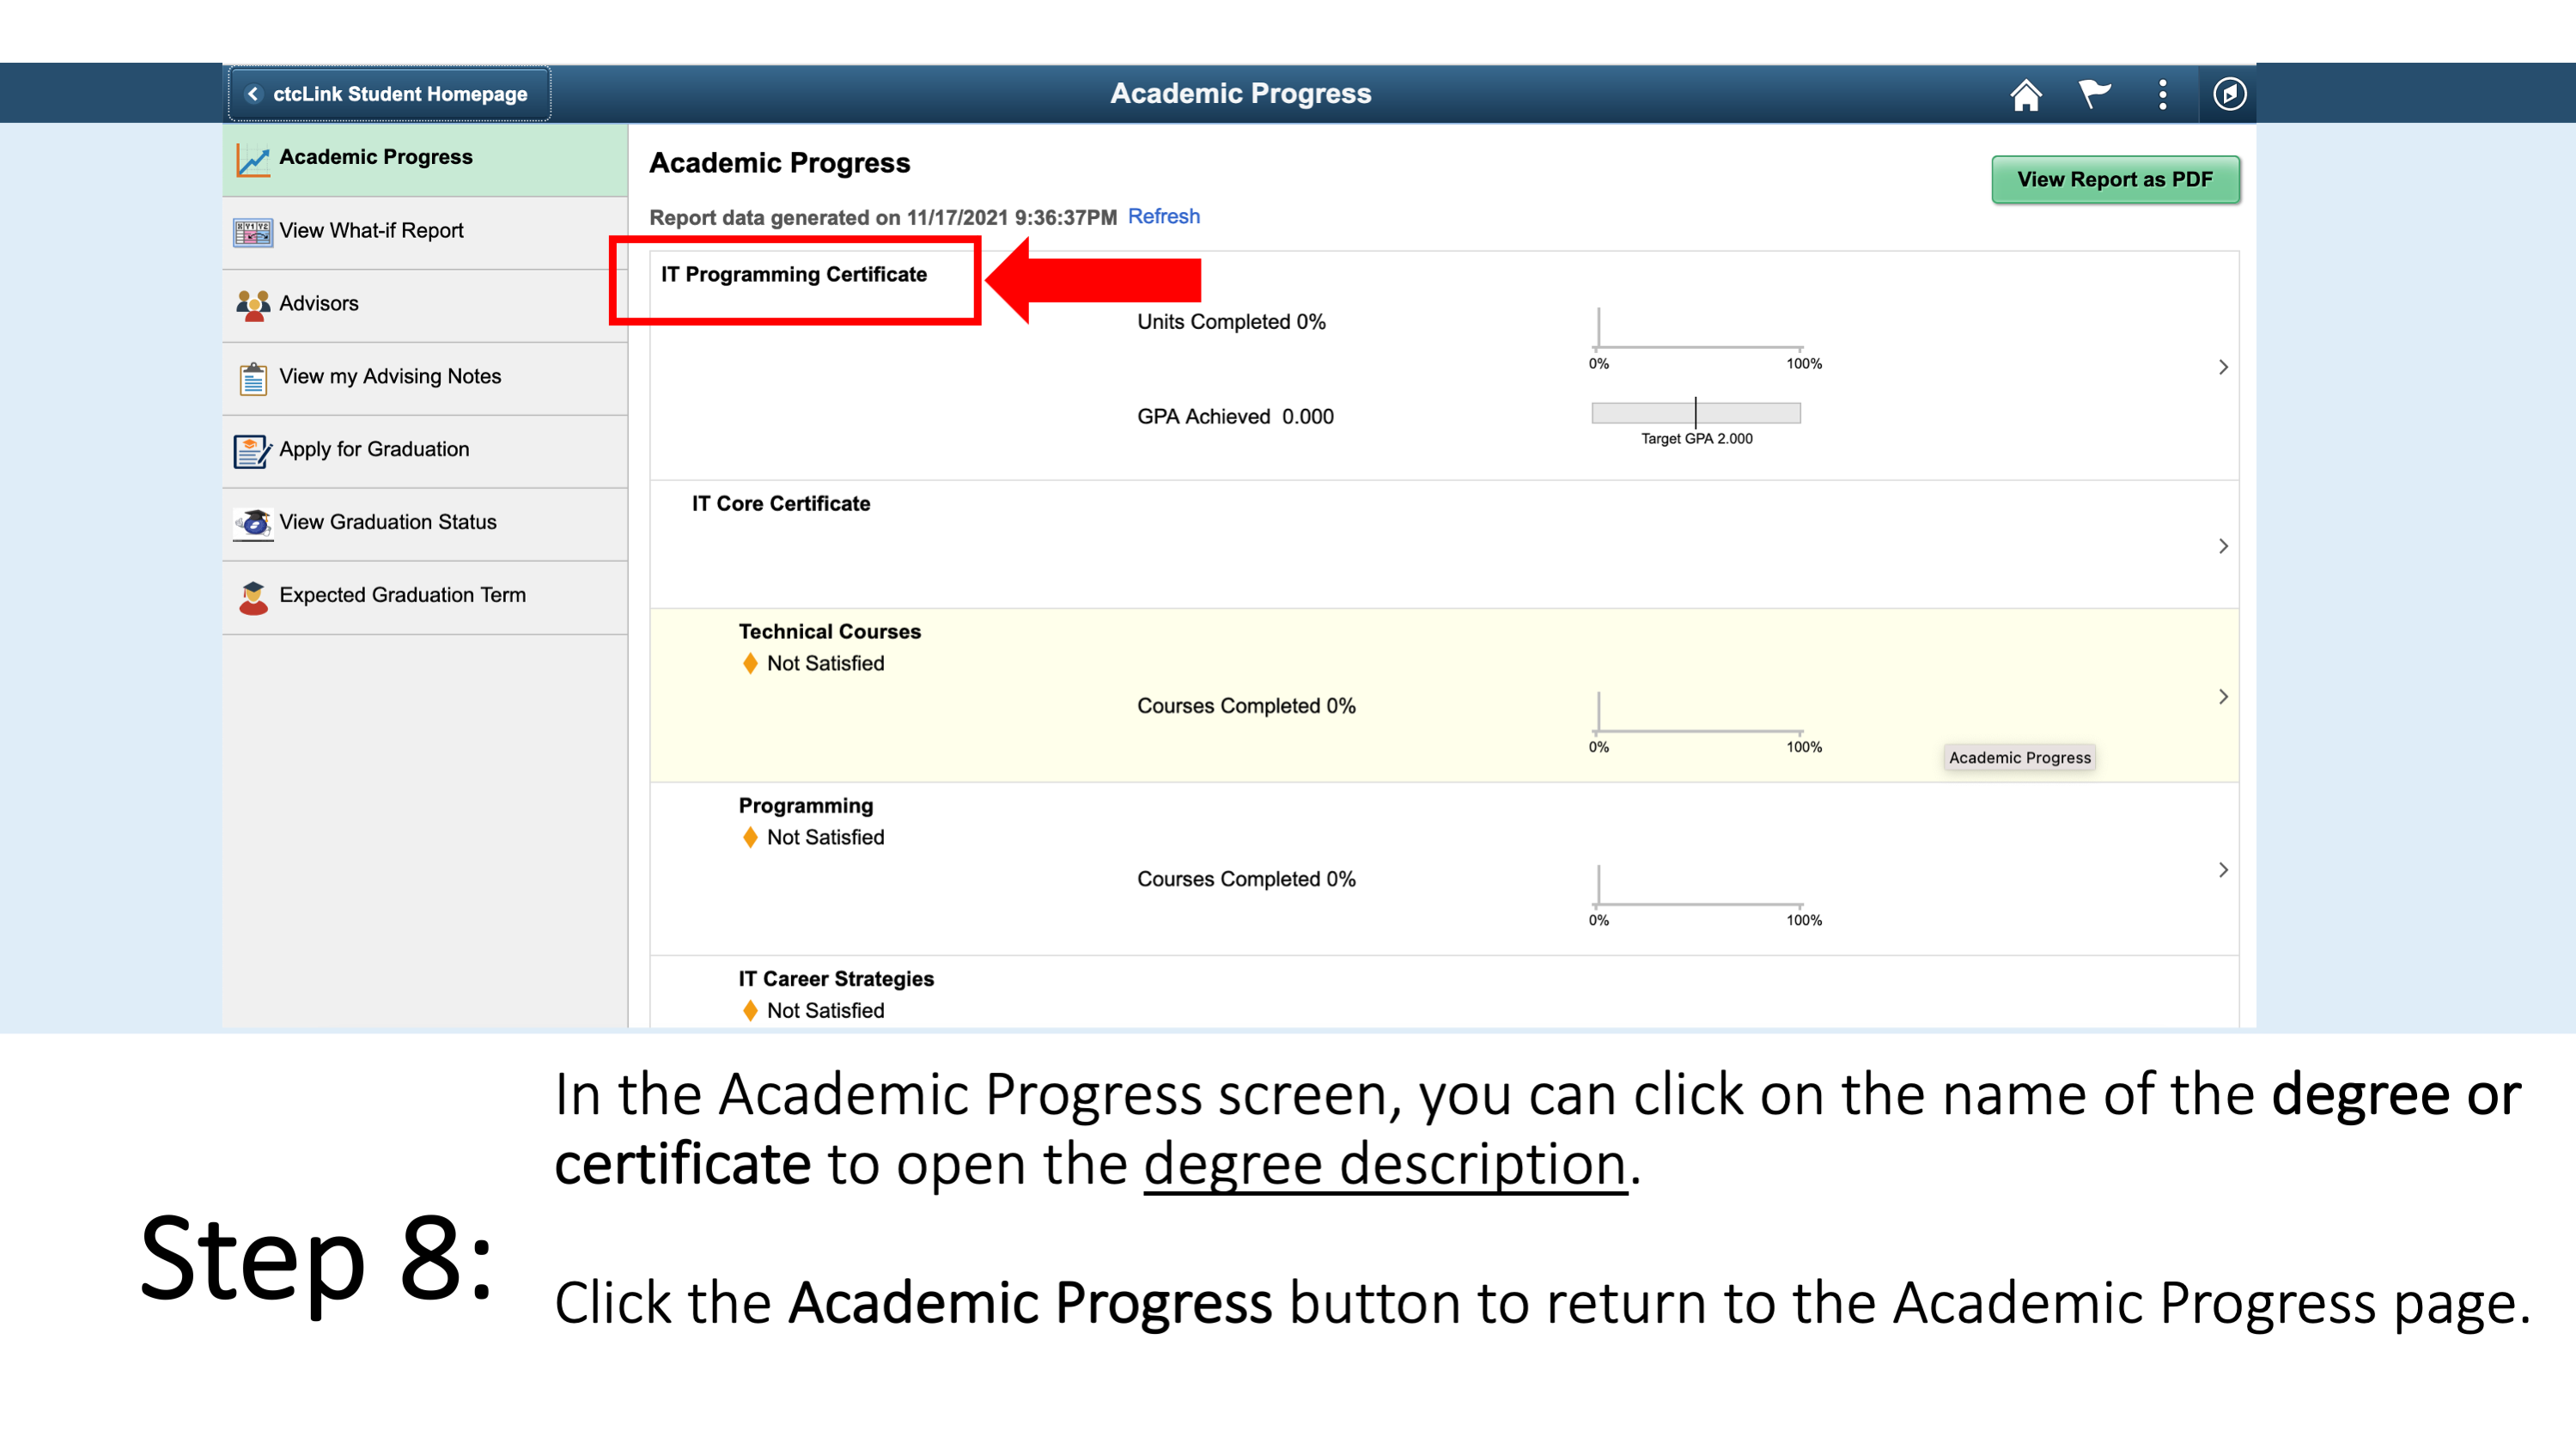 Step 8: In the Academic Progress screen, you can click on the name of the degree or certificate to open the degree description. Click the Academic Progress button to return to the Academic Progress page. 